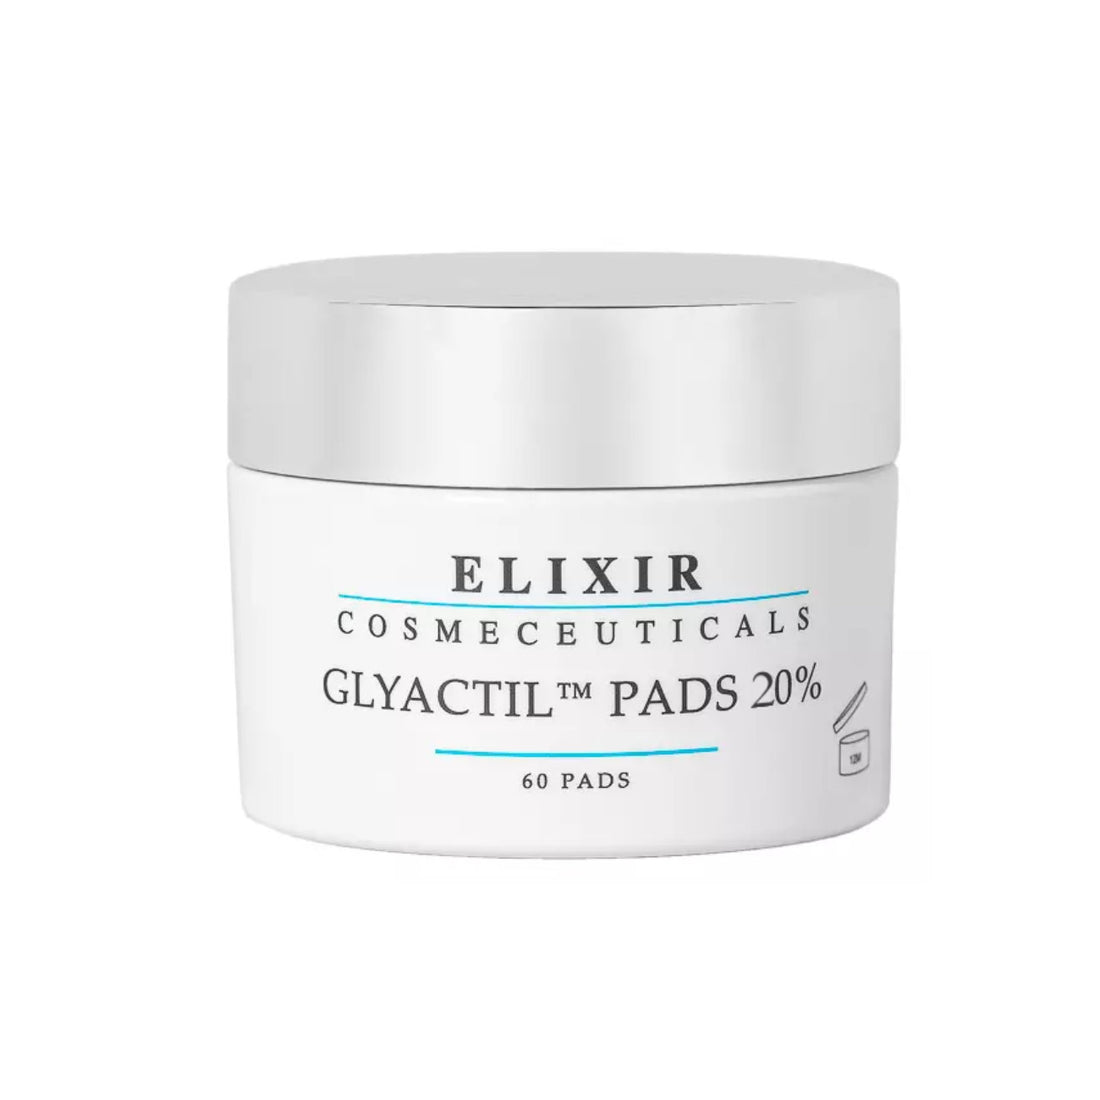 Elixir Pads Glyactic 20% 60 pads